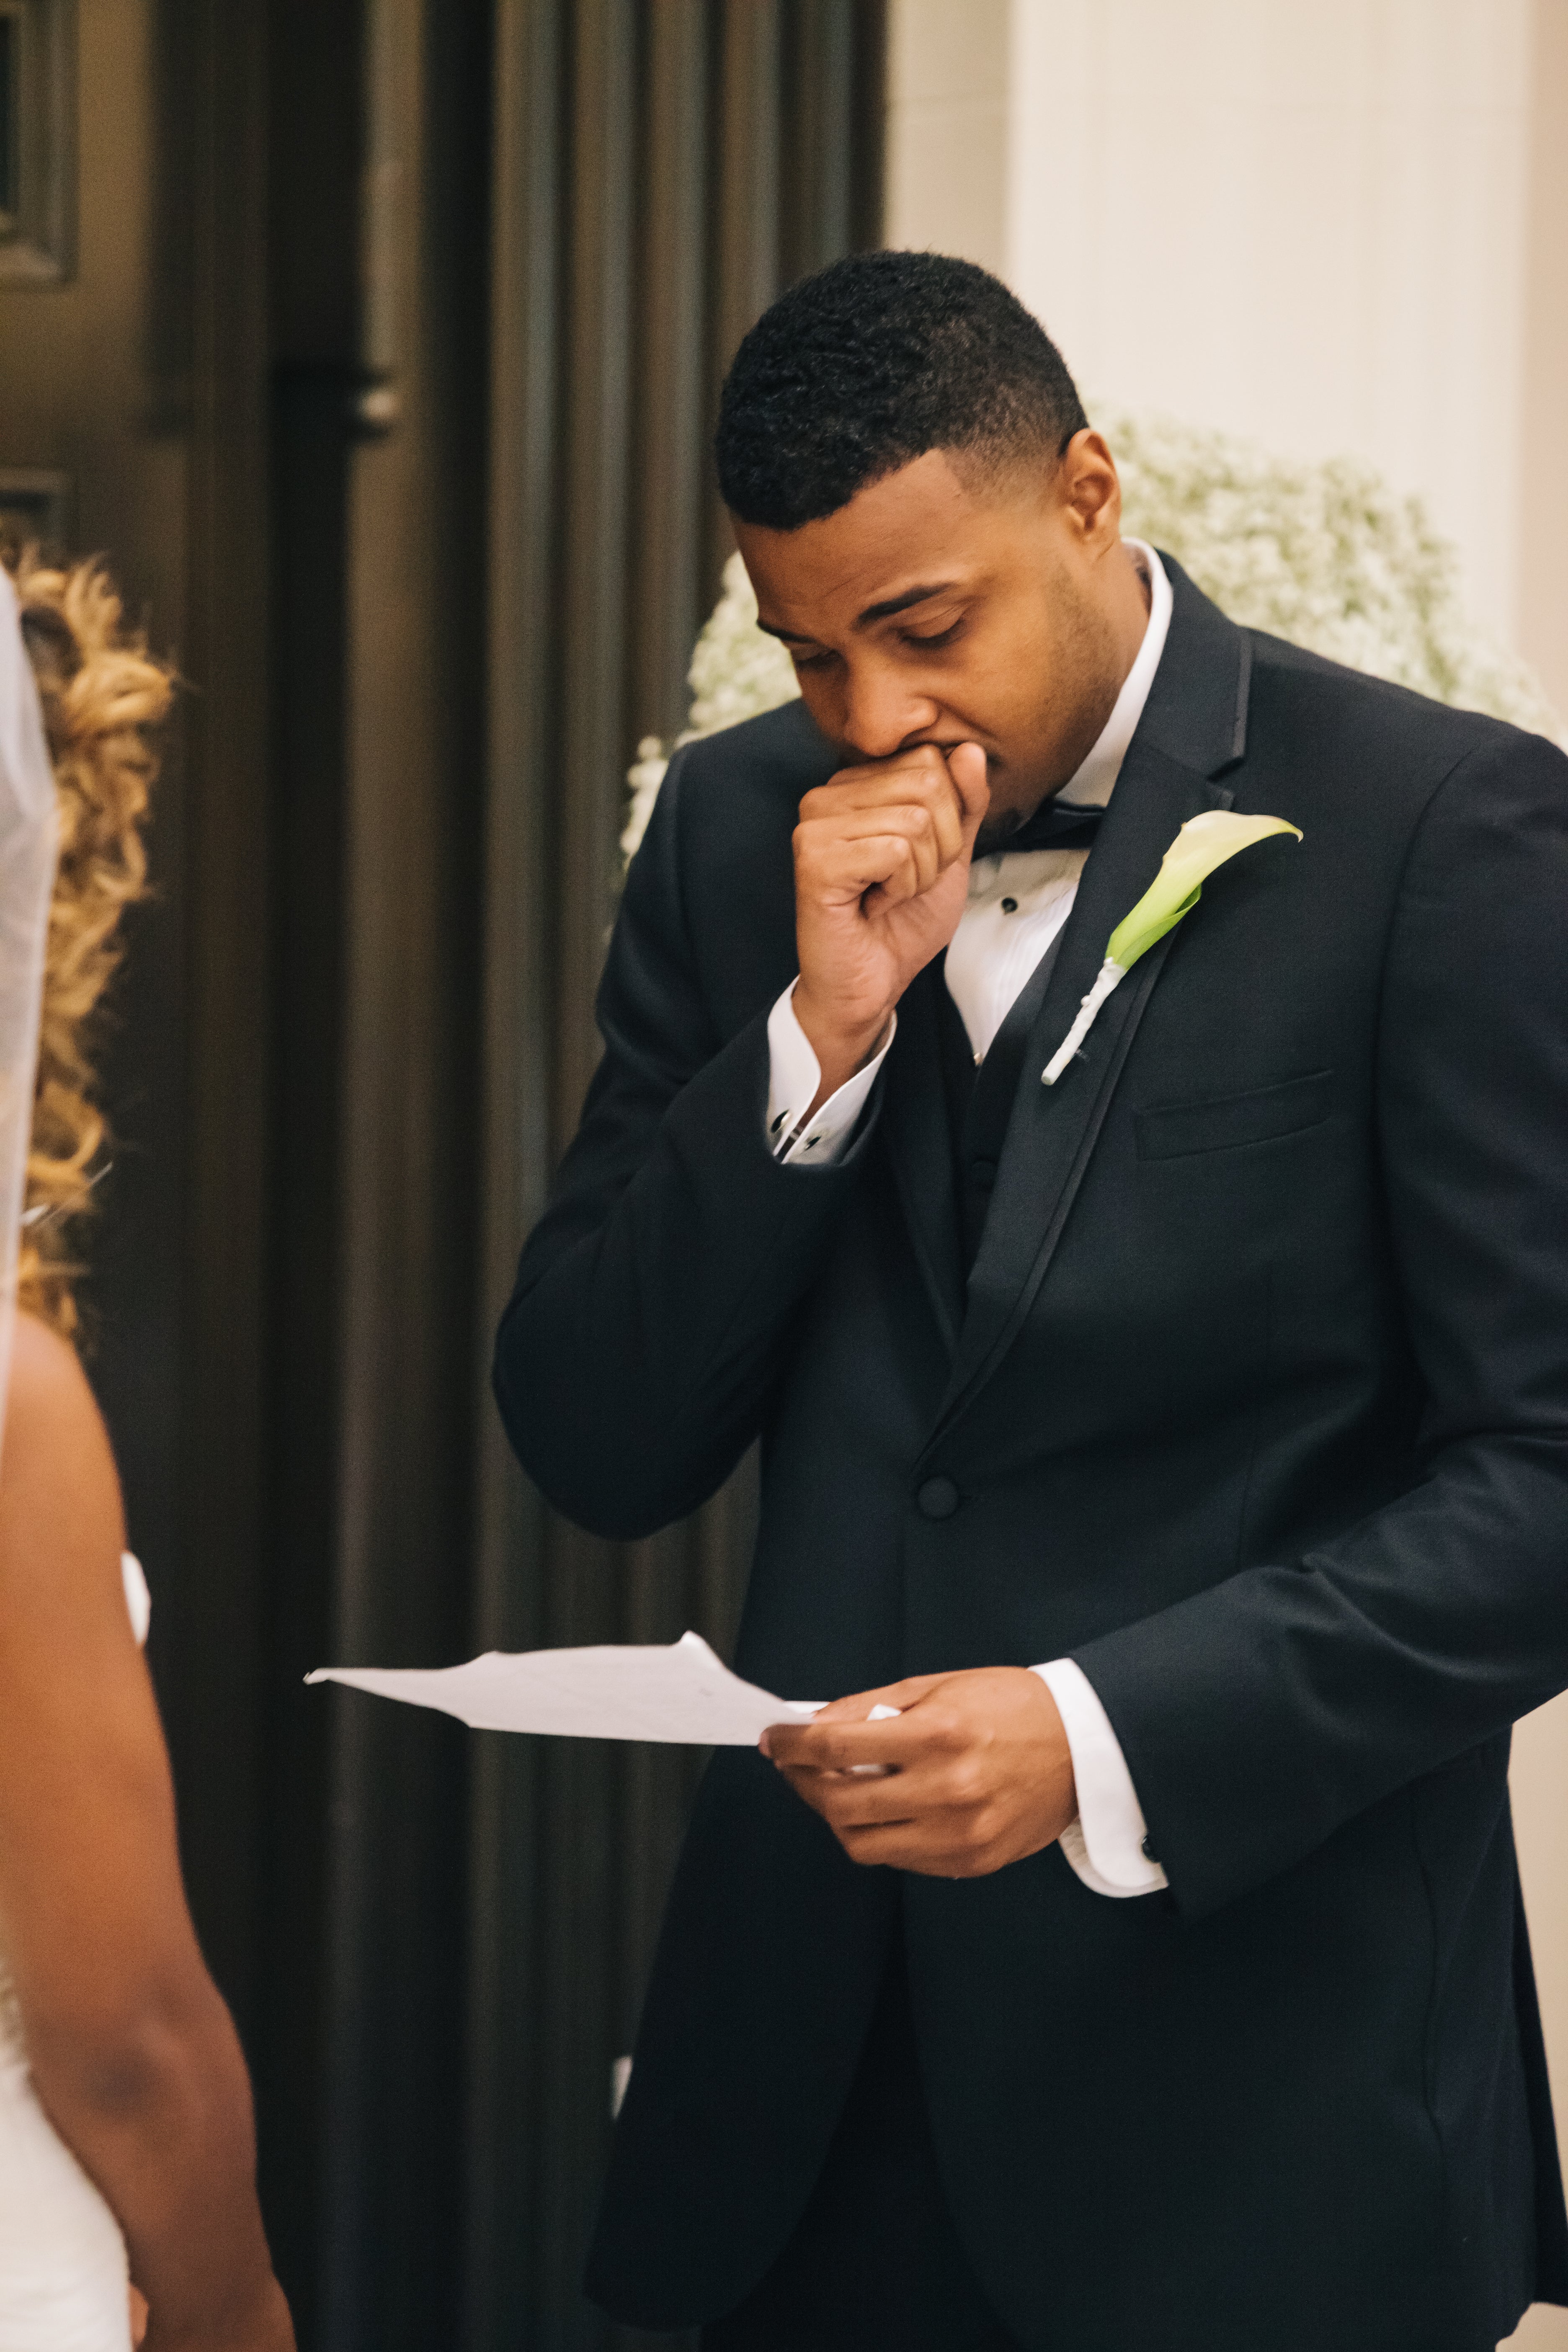 Bridal Bliss: Robert and Jeanette's Modern D.C. Wedding Was Stunning
